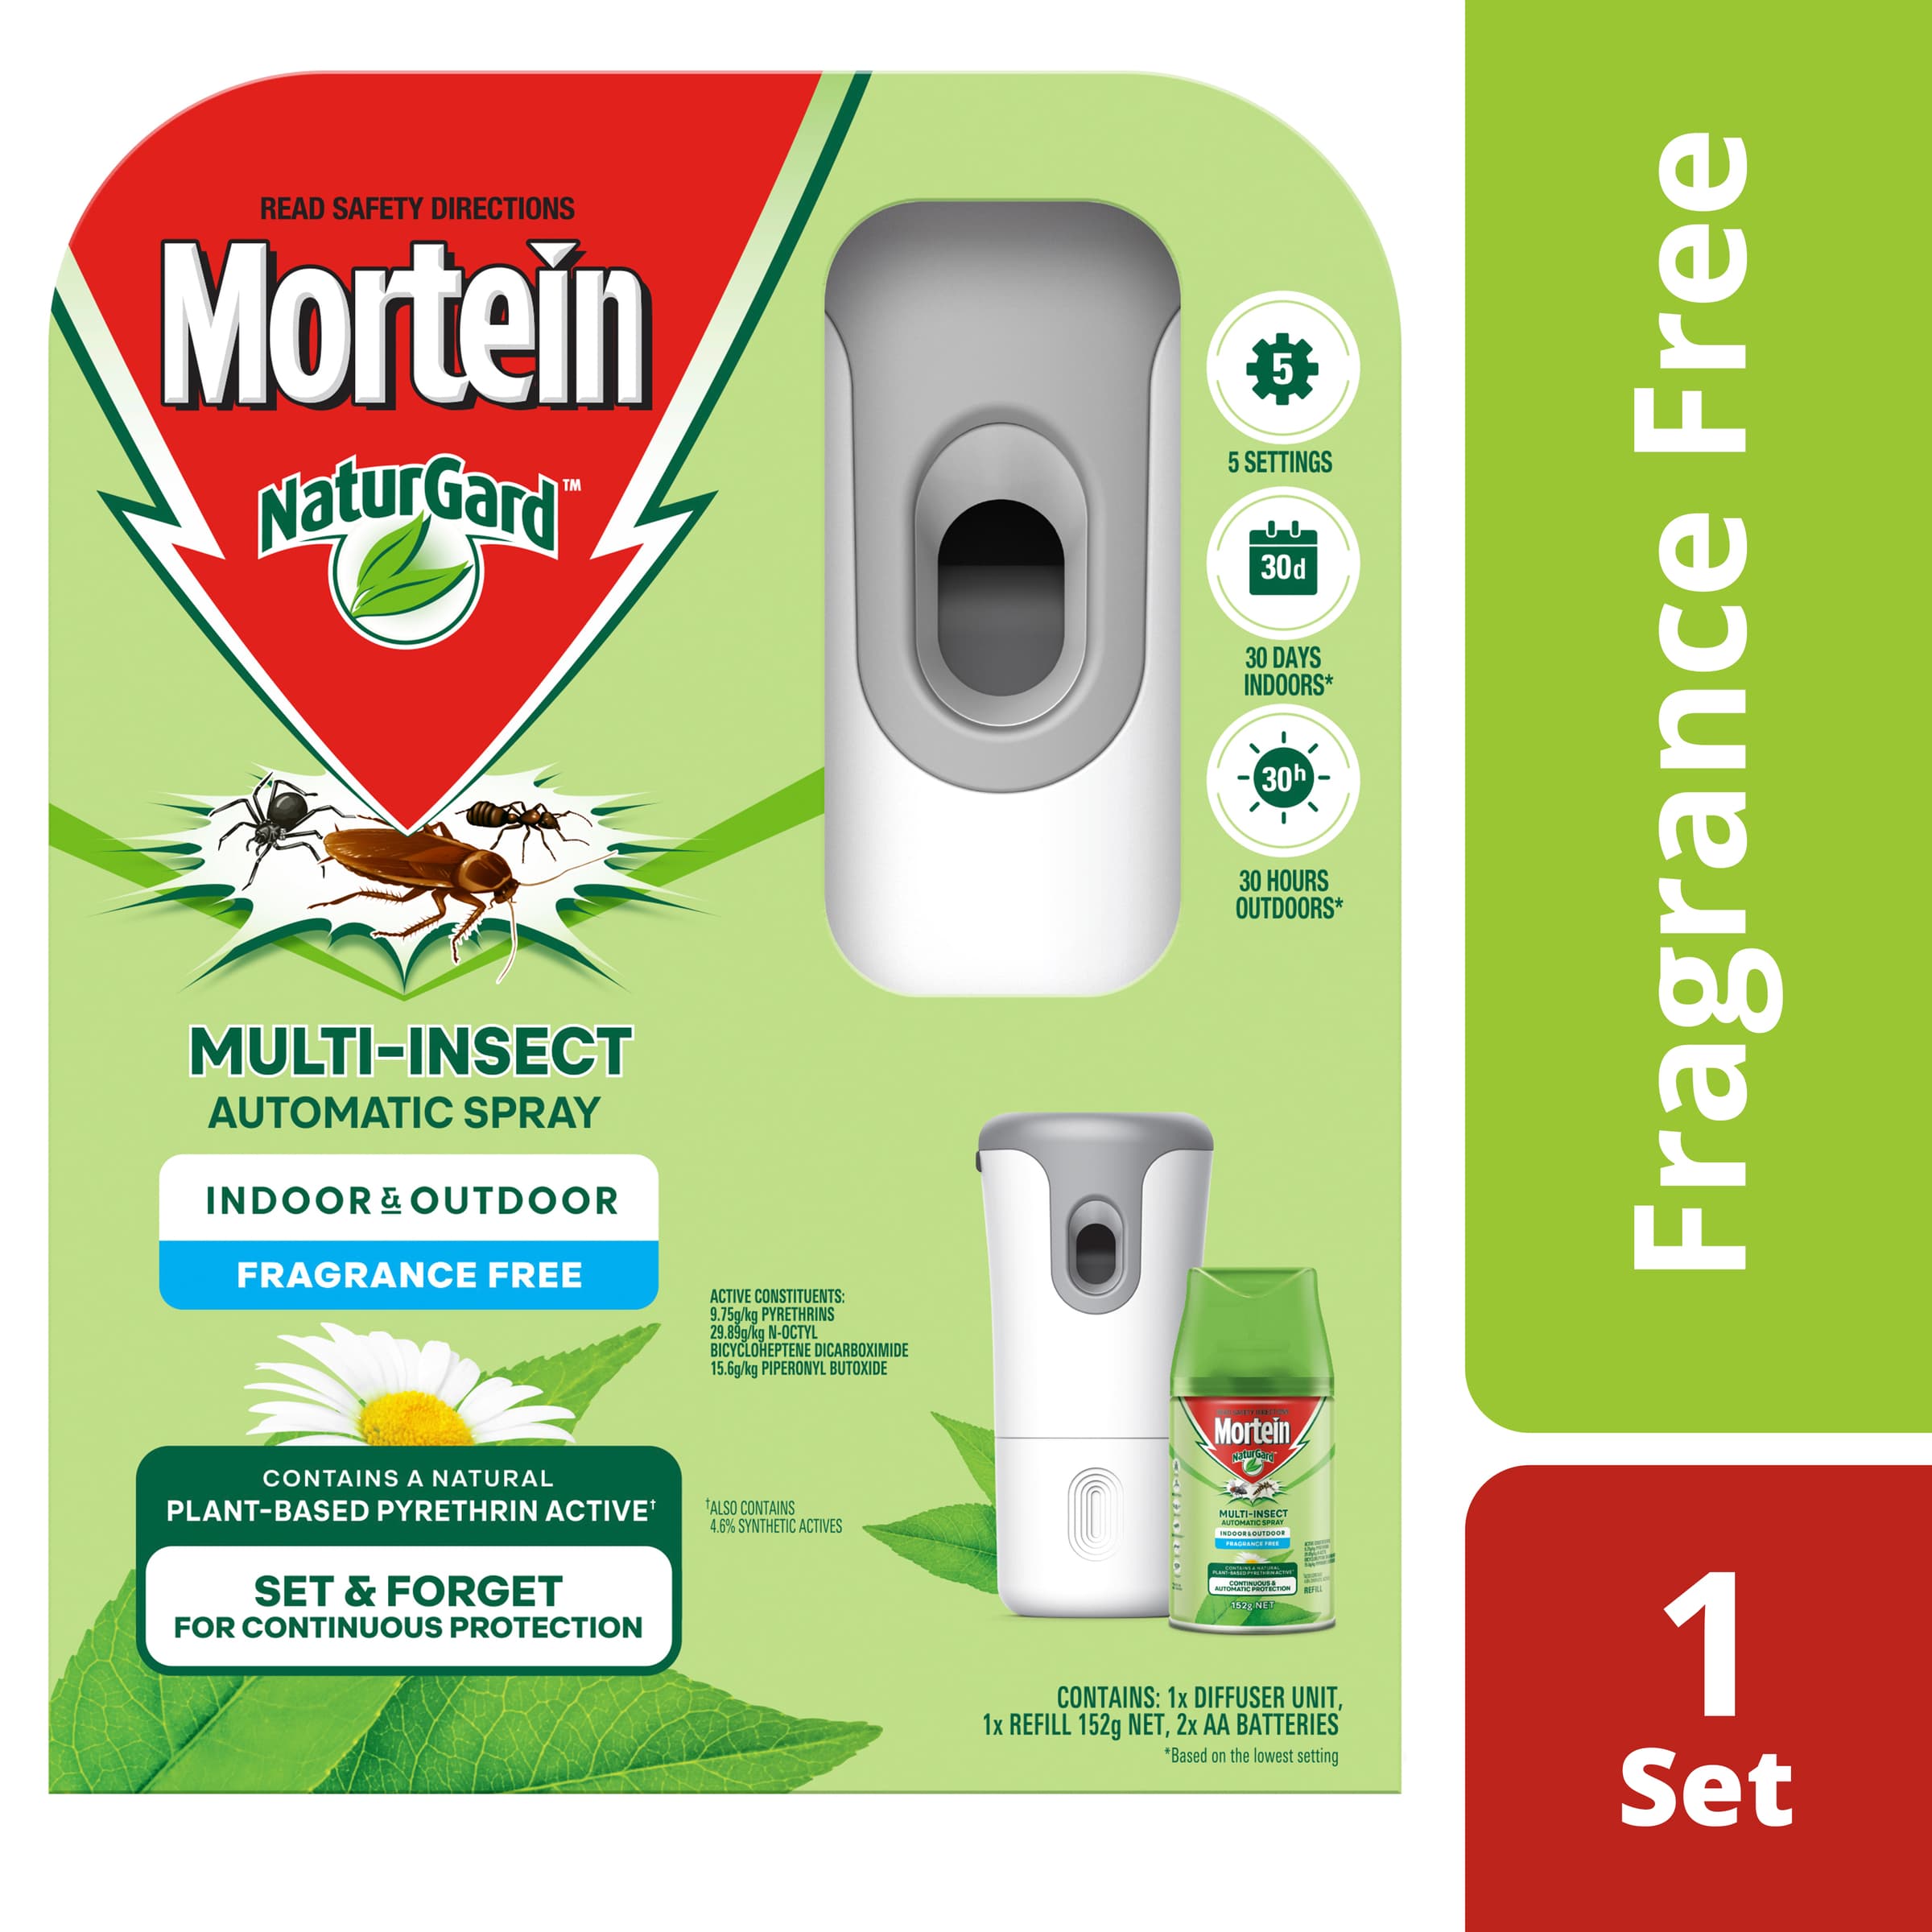 Mortein NaturGard Multi-Insect Automatic Diffuser Kit Fragrance Free 152g